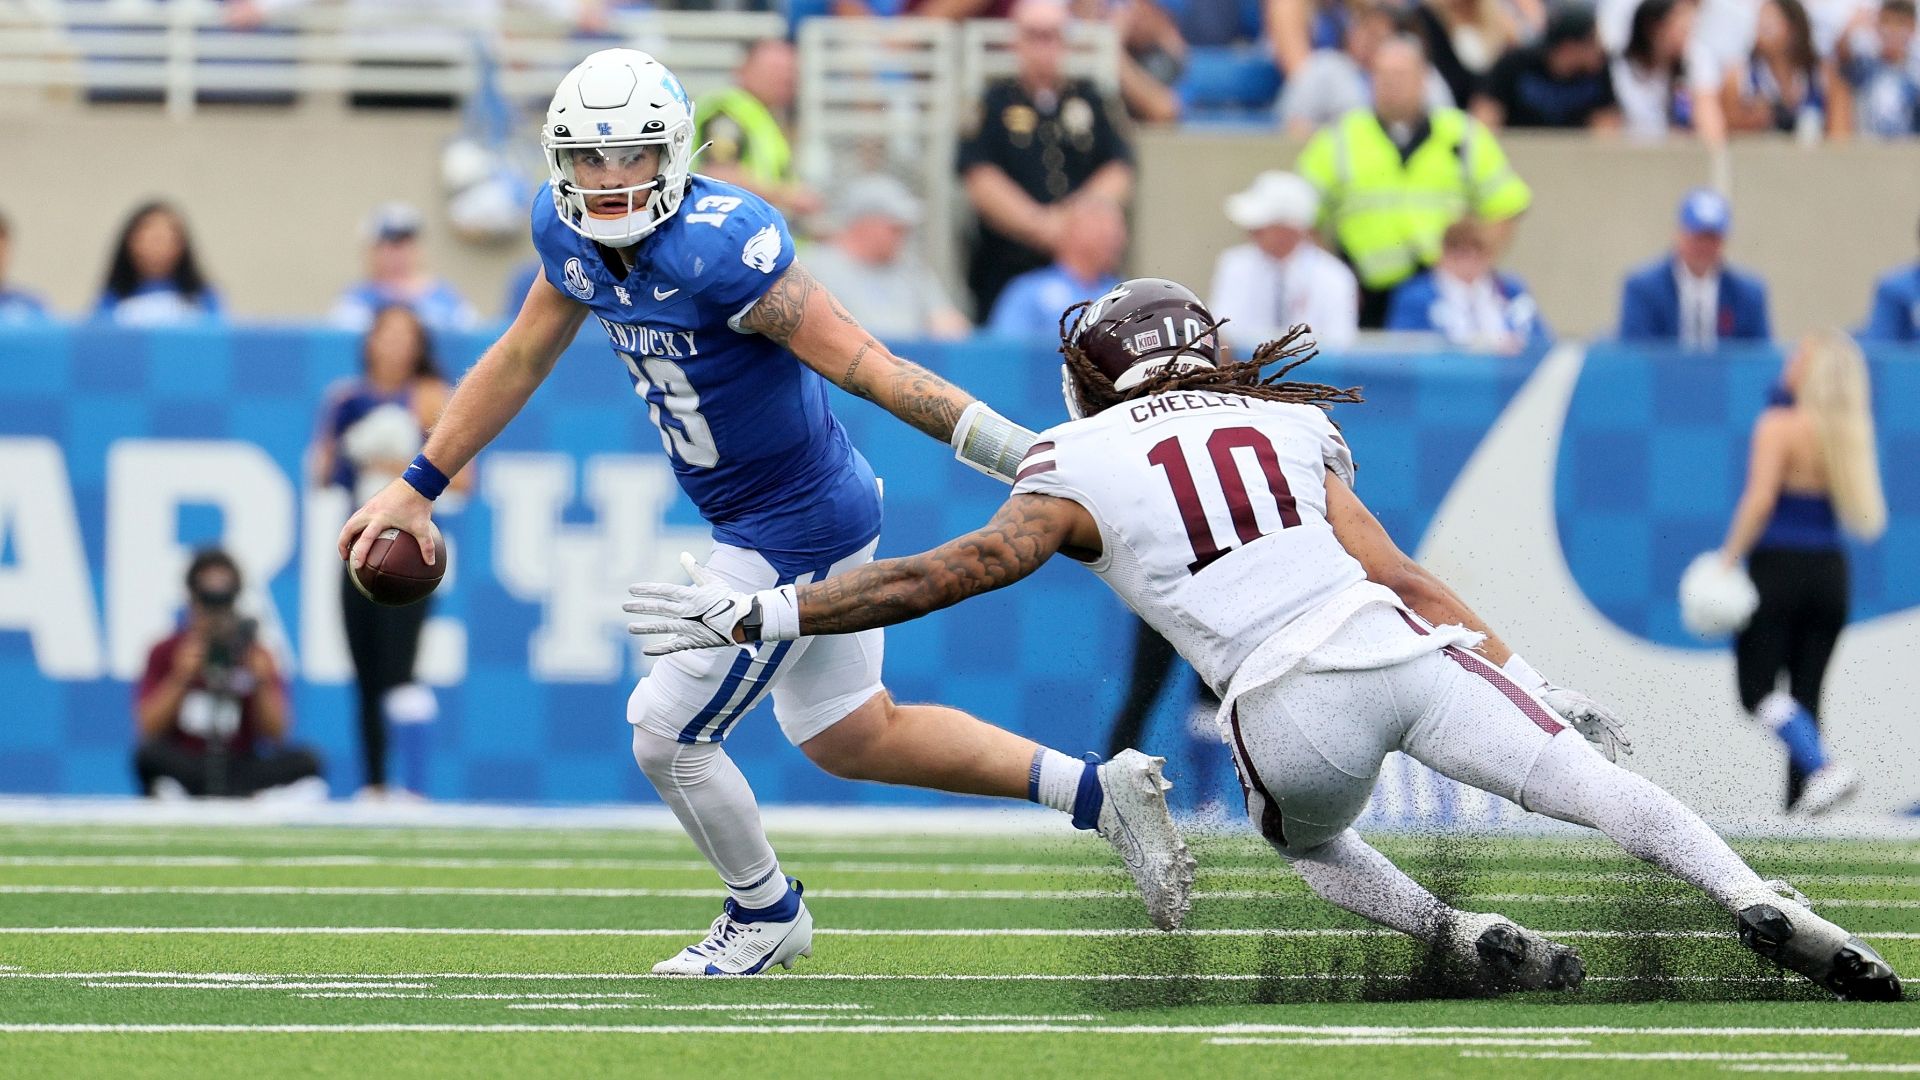 Leary tosses 4 TDs in UK’s comeback win over EKU